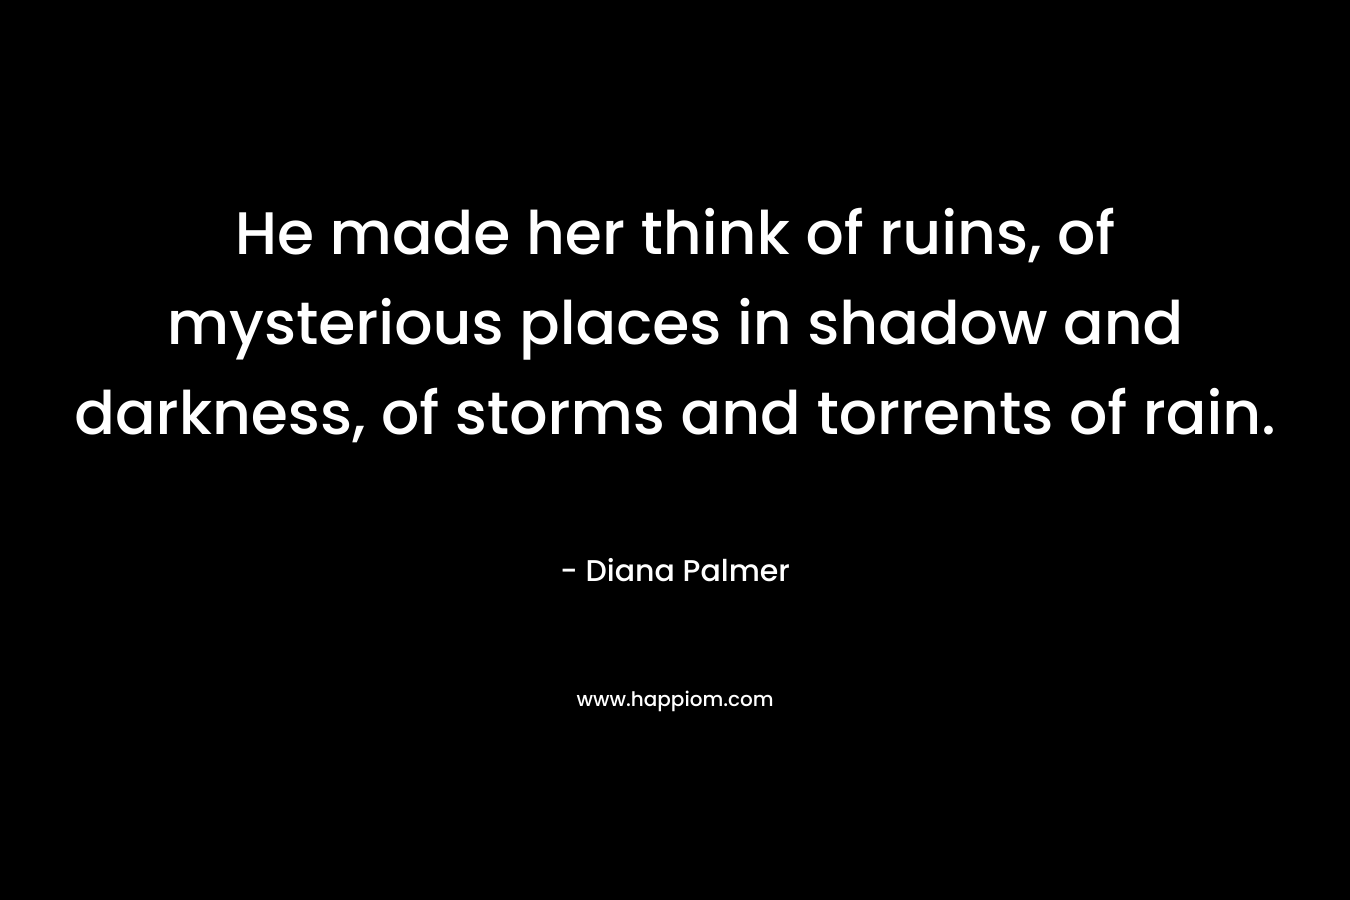 He made her think of ruins, of mysterious places in shadow and darkness, of storms and torrents of rain.